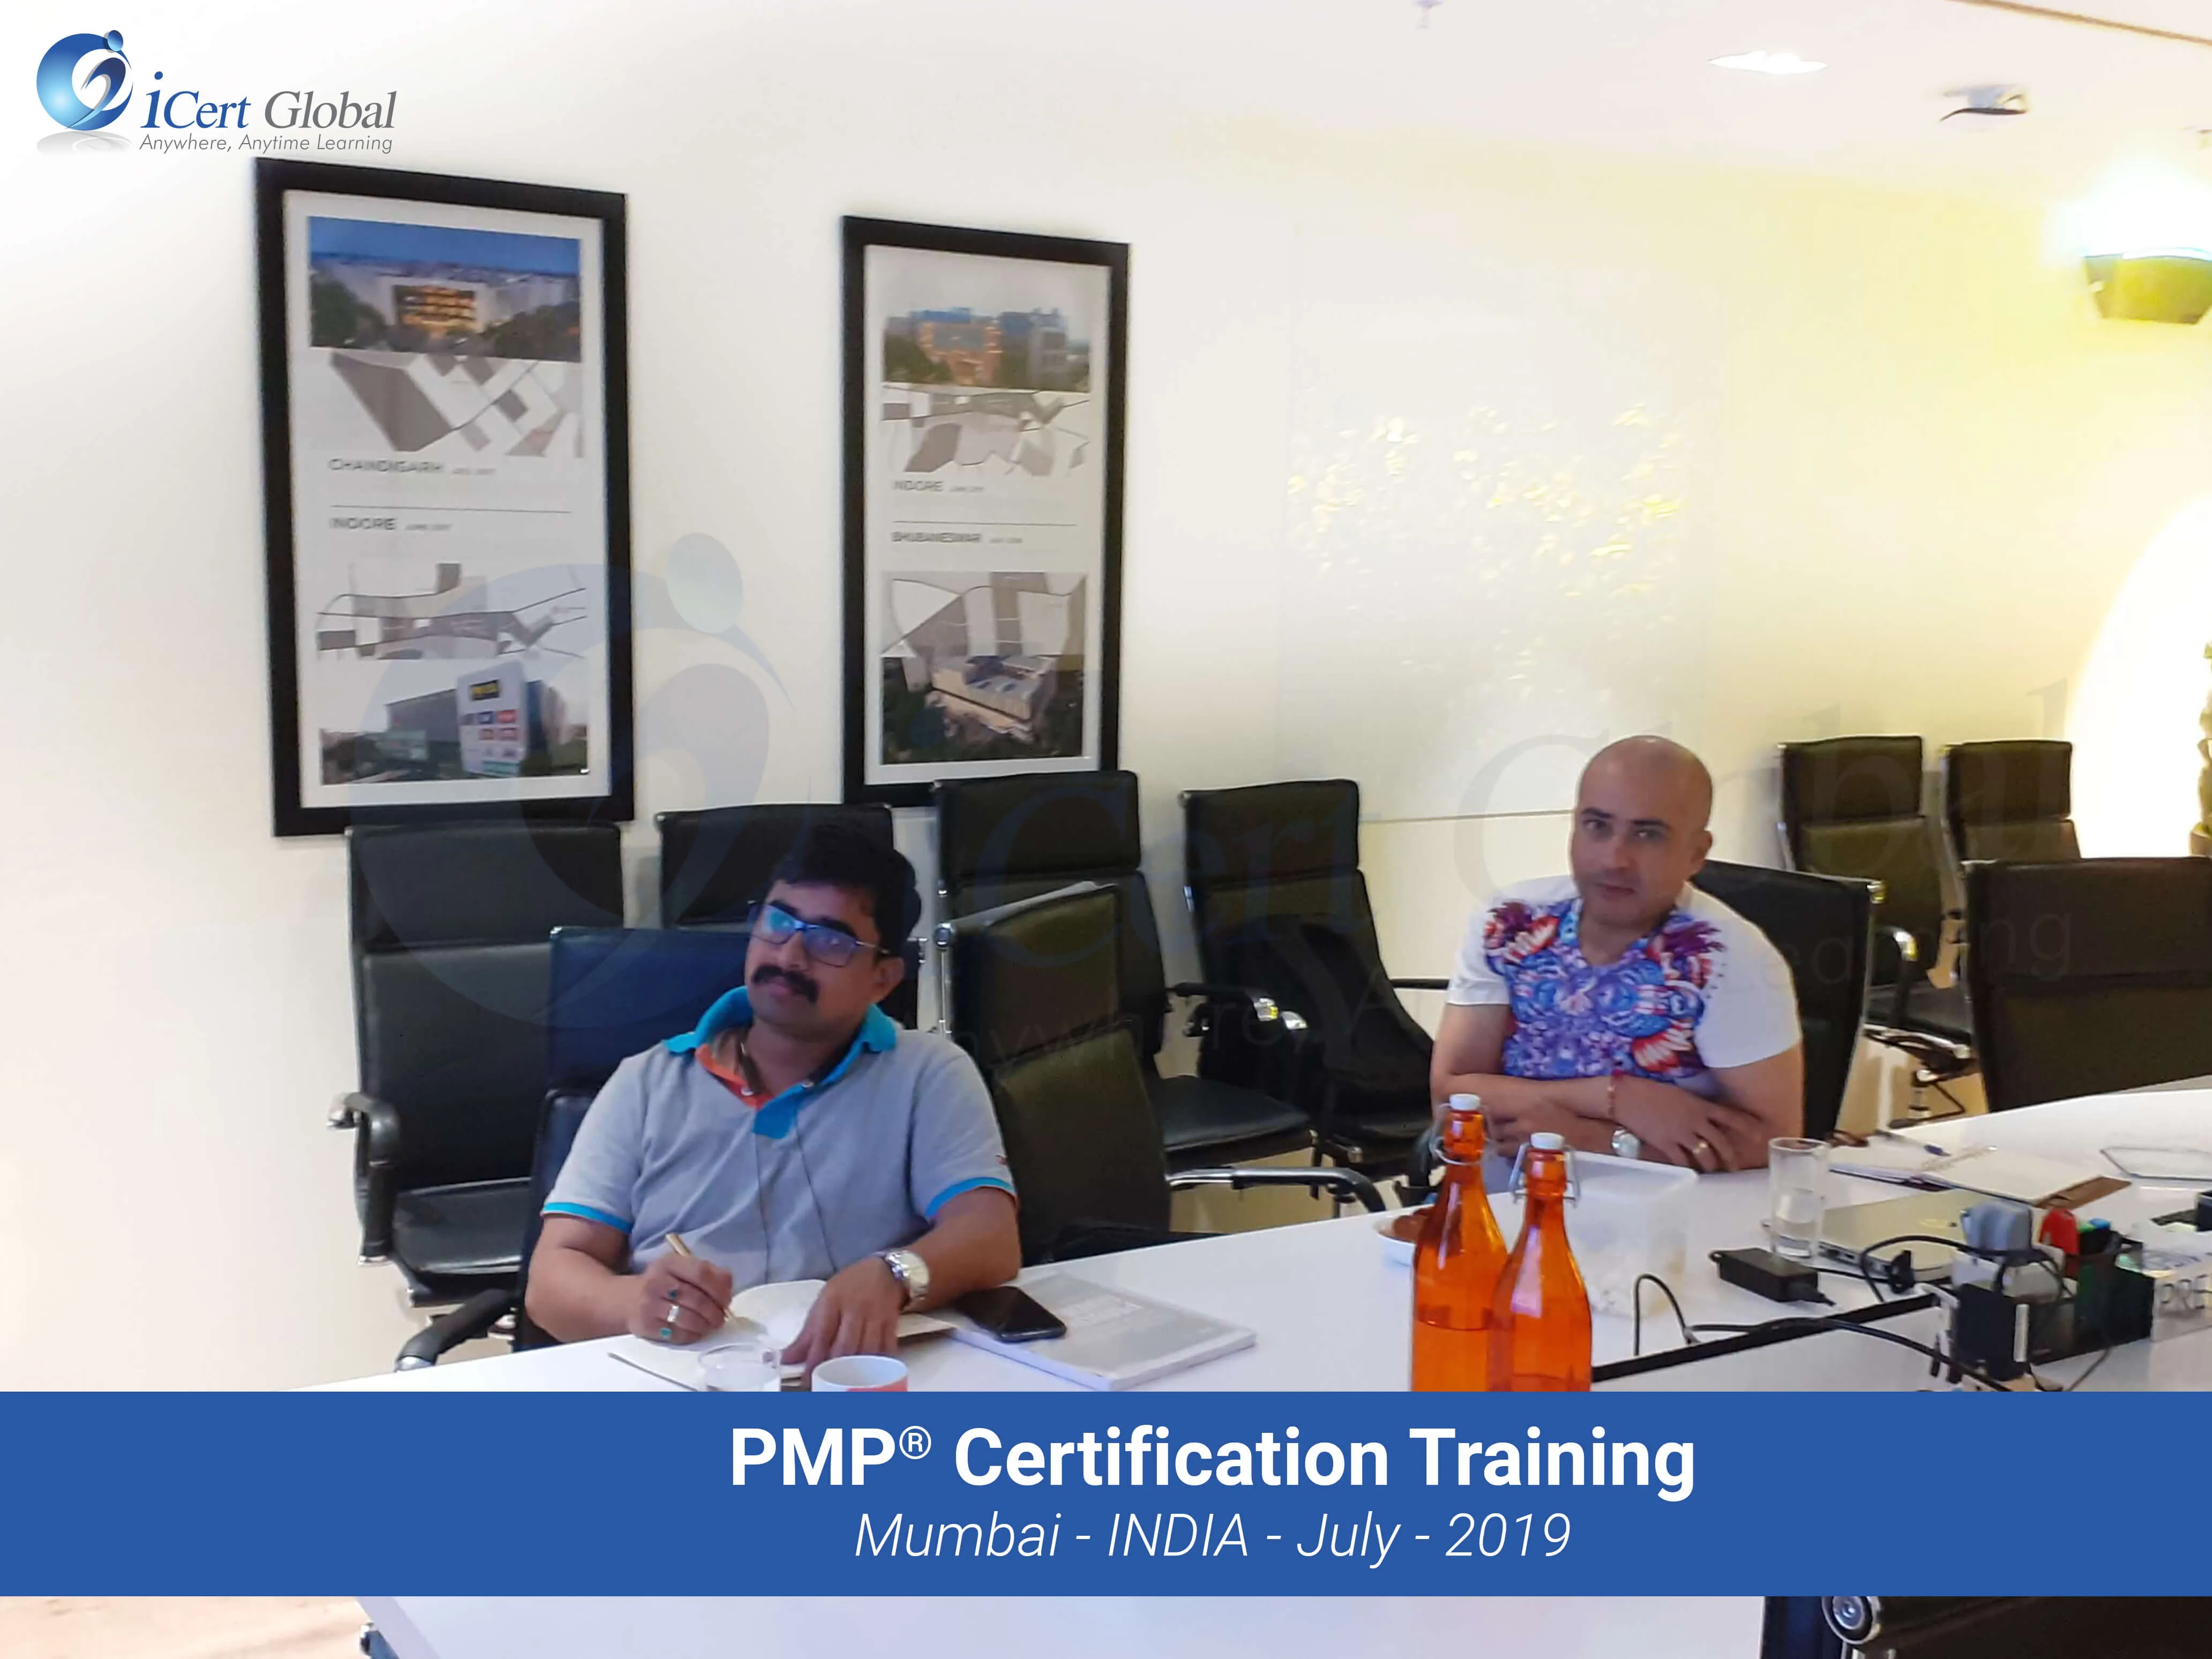 PMP Project Management Certification Training in Mumbai by iCert Global in July 2019 